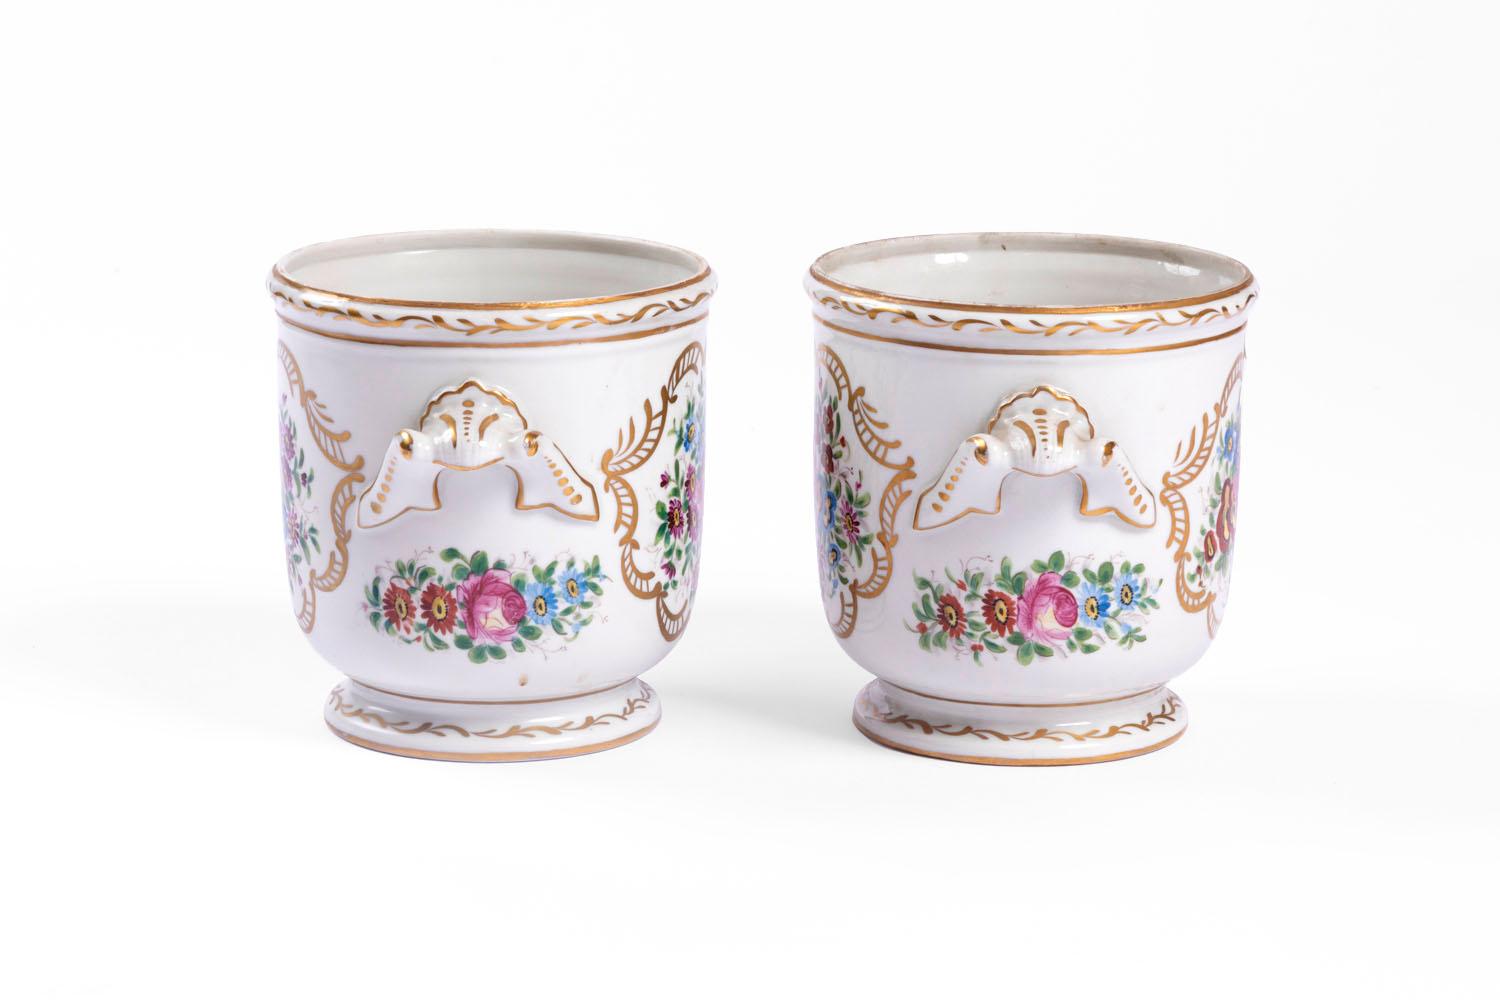 Pair of white background Limoges porcelain coolers. Polychrome enamel ornamentation representing flowers bouquets of roses, forget-me-not, blue and purple gerbera daisies, visible on each face of the coolers and in small size beneath the handles.